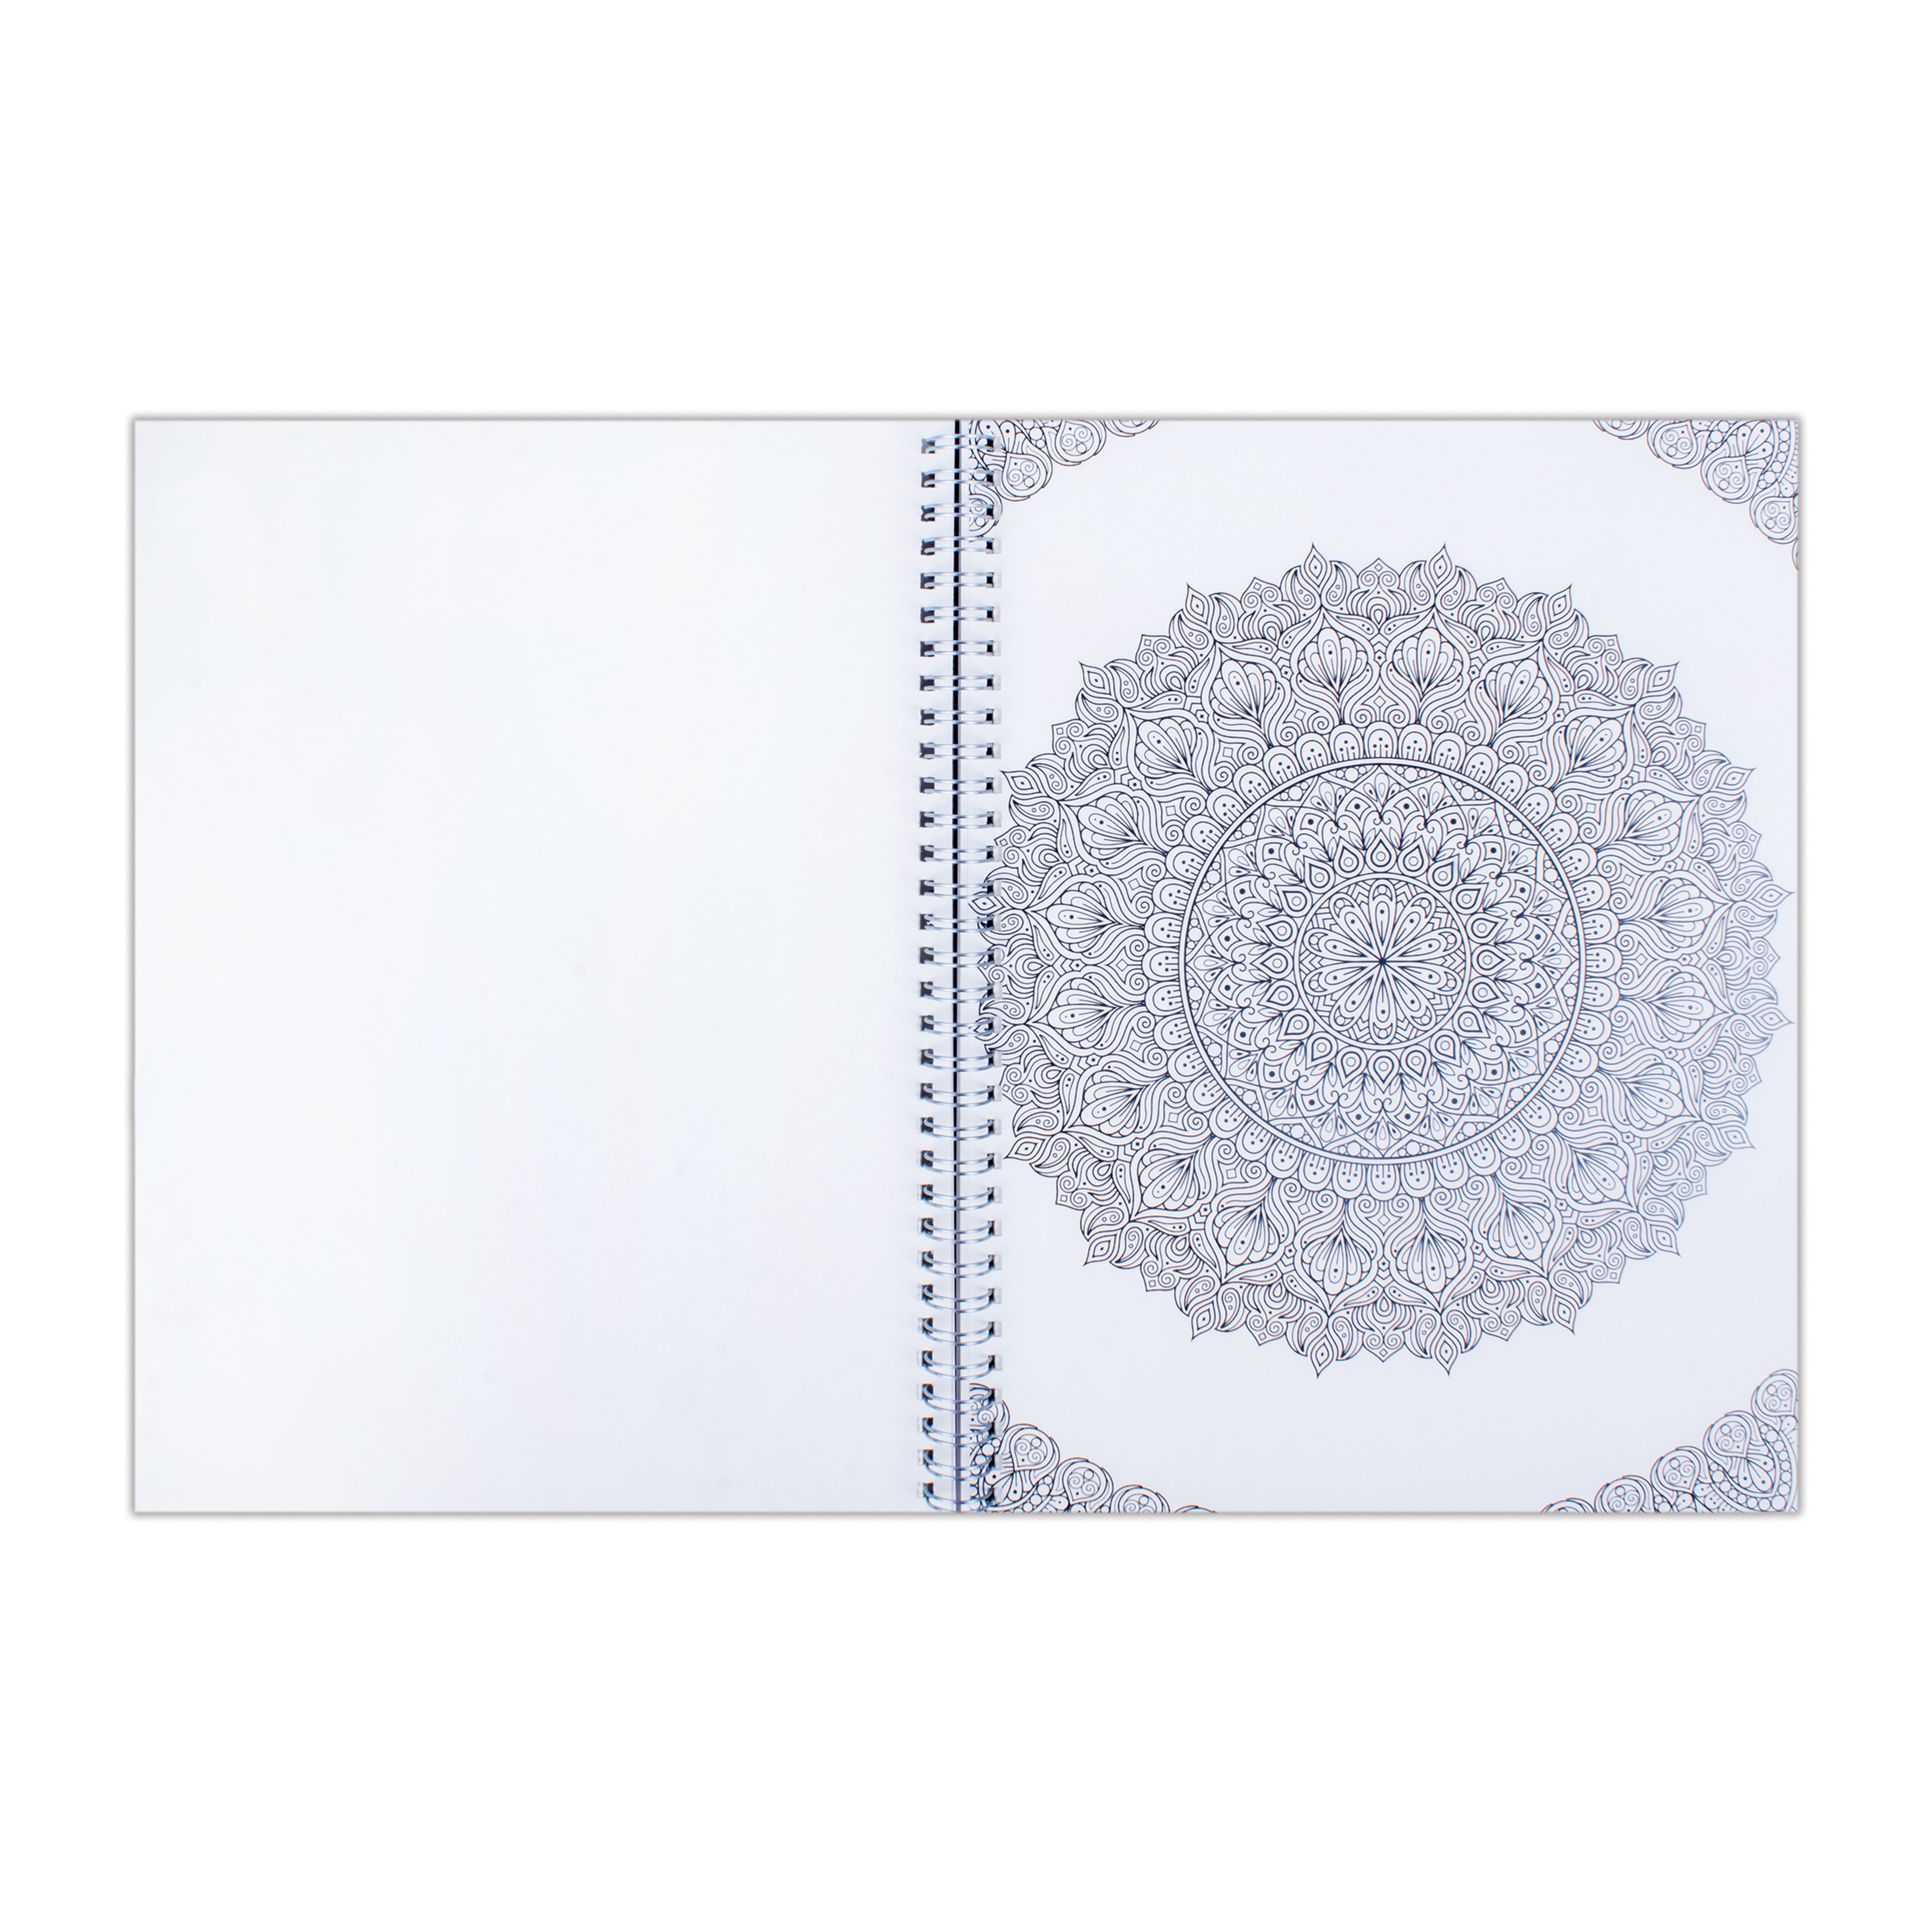 Mystic Mandalas Sketchbook | L11 XW8.2Inch | Wire-O | 150gsm - 50pages - 1 Book